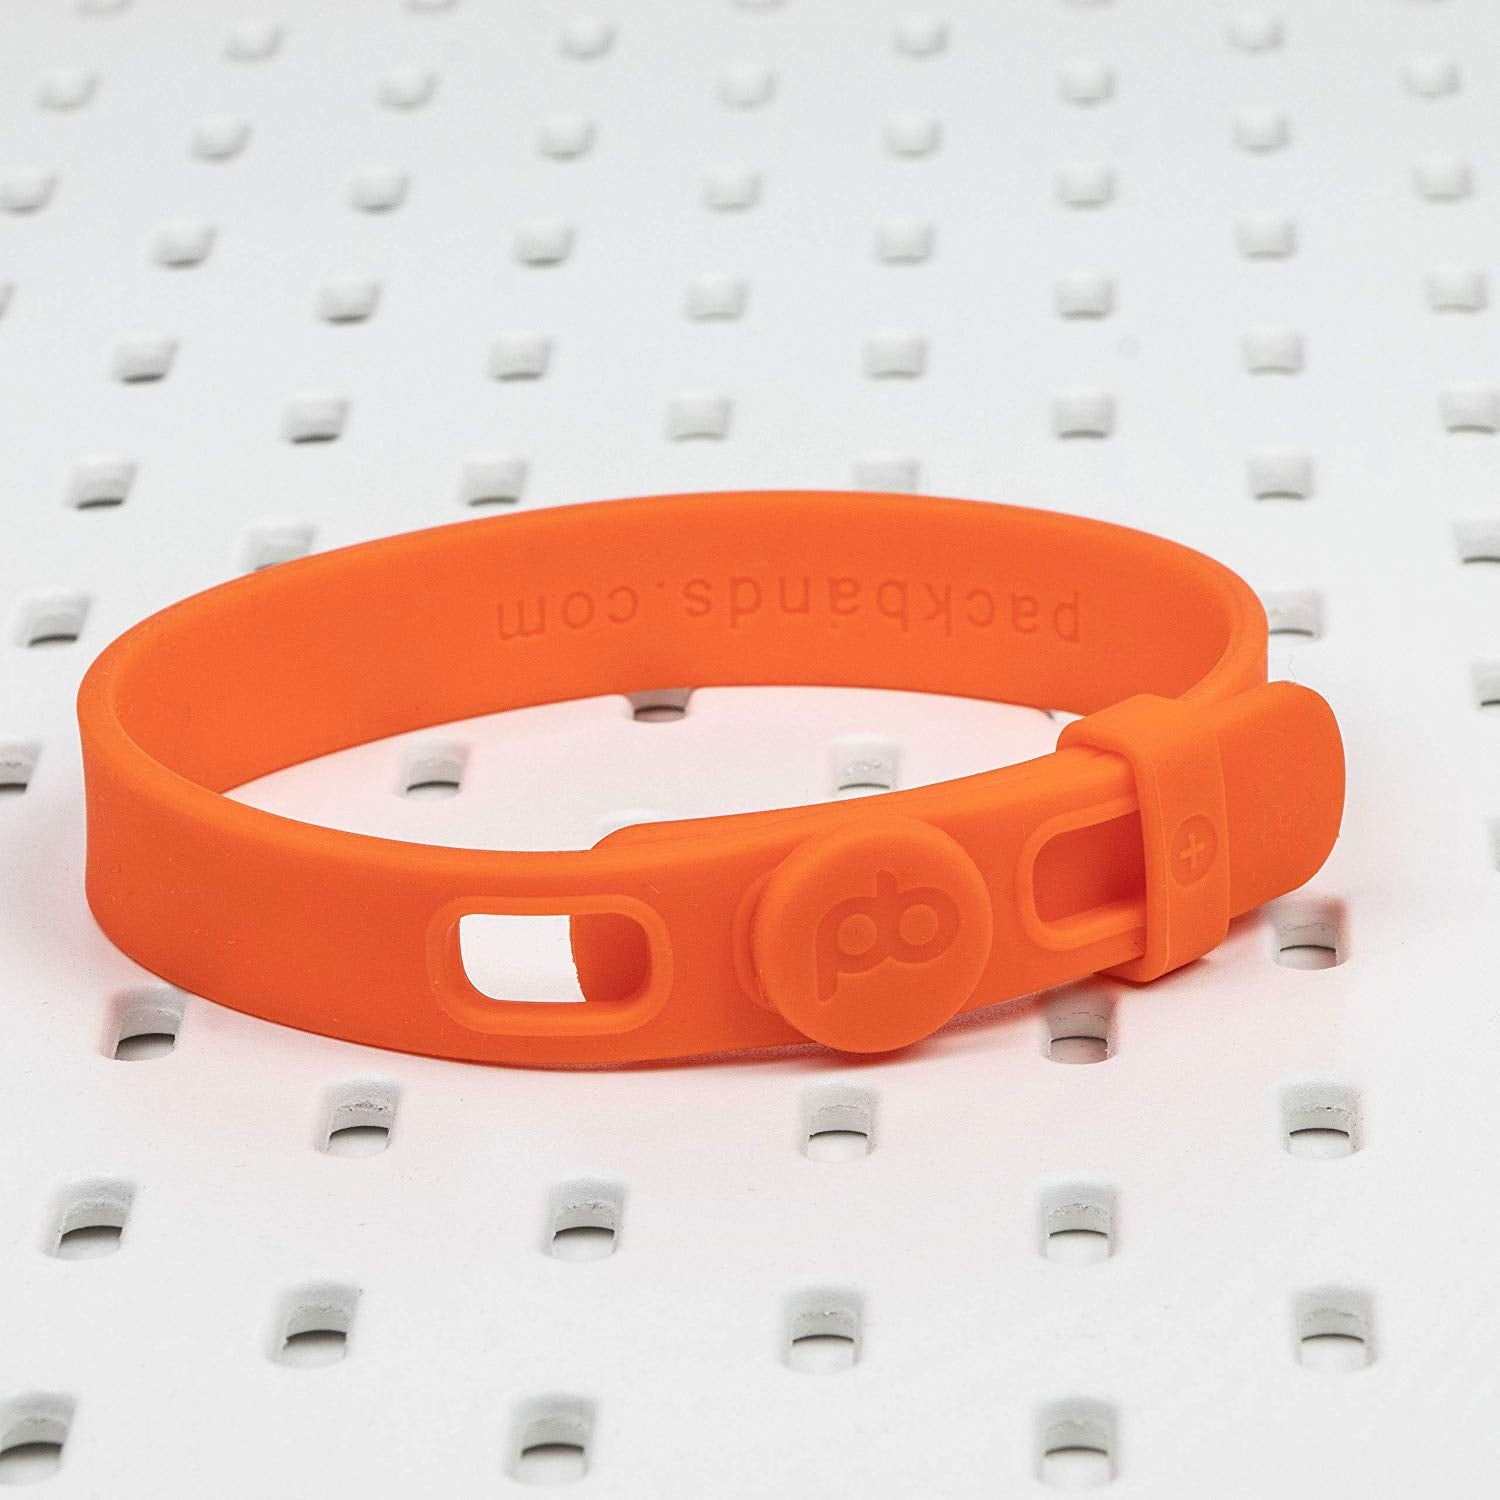 Packbands SinglePack 15” Orange – Large Packband | Multipurpose Adjustable Strap | Strong, Stretchy, 100% Silicone | Secure Sports and Outdoor Gear, Bulky Clothing, Cords | 100% Guaranteed